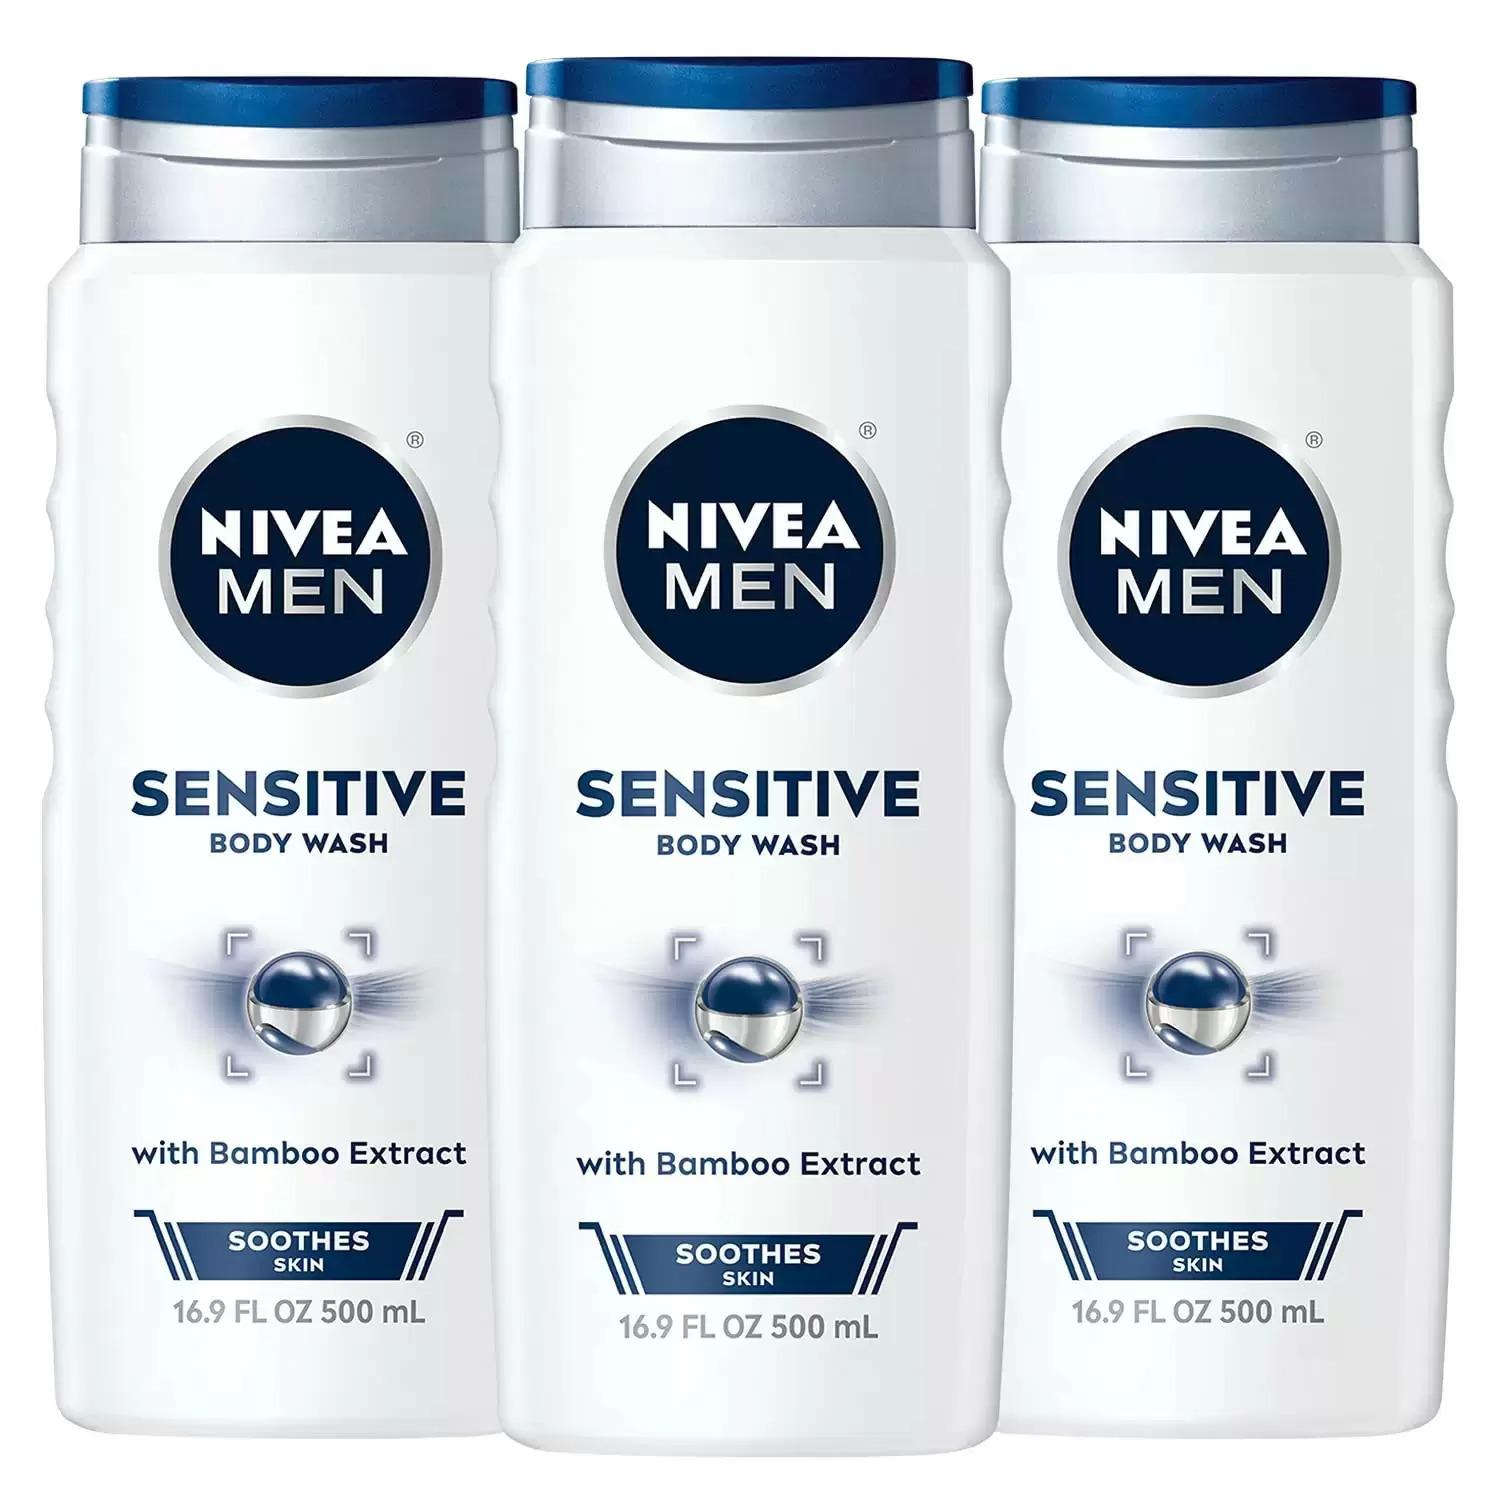 3 Nivea Men Sensitive Body Wash with Bamboo Extract for $9 Shipped